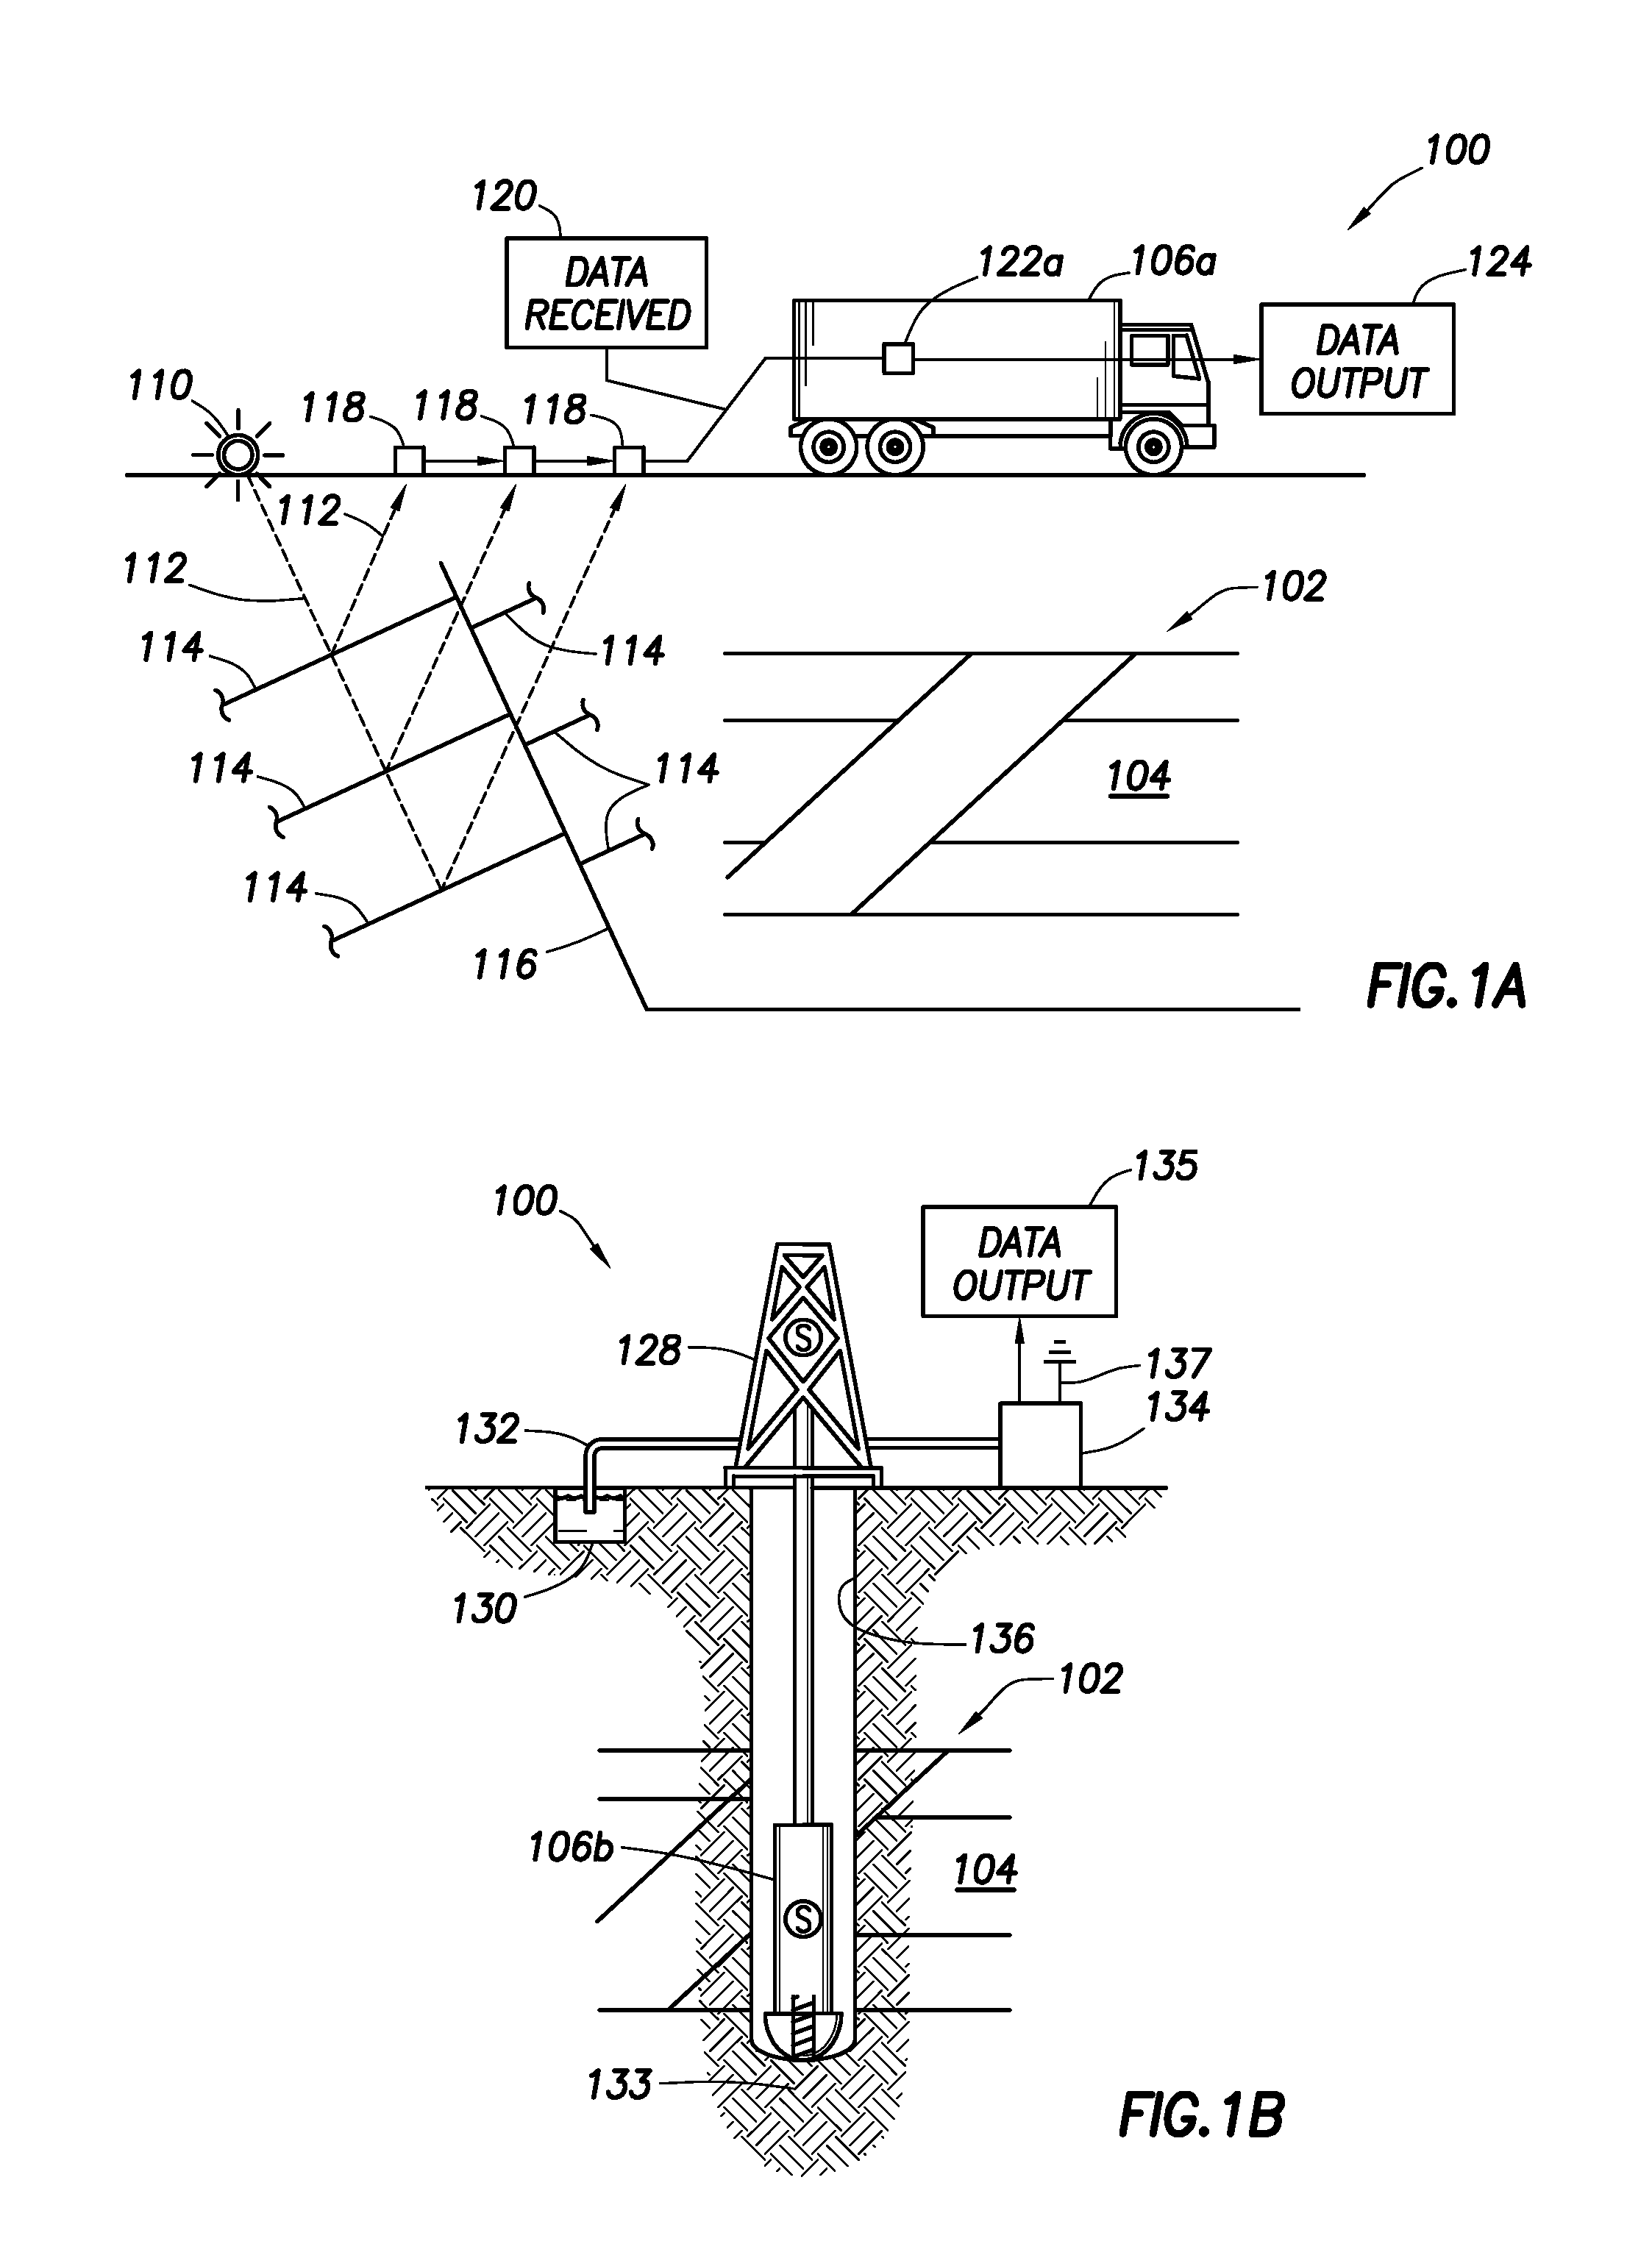 Method and system to obtain a compositional model of produced fluids using separator discharge data analysis